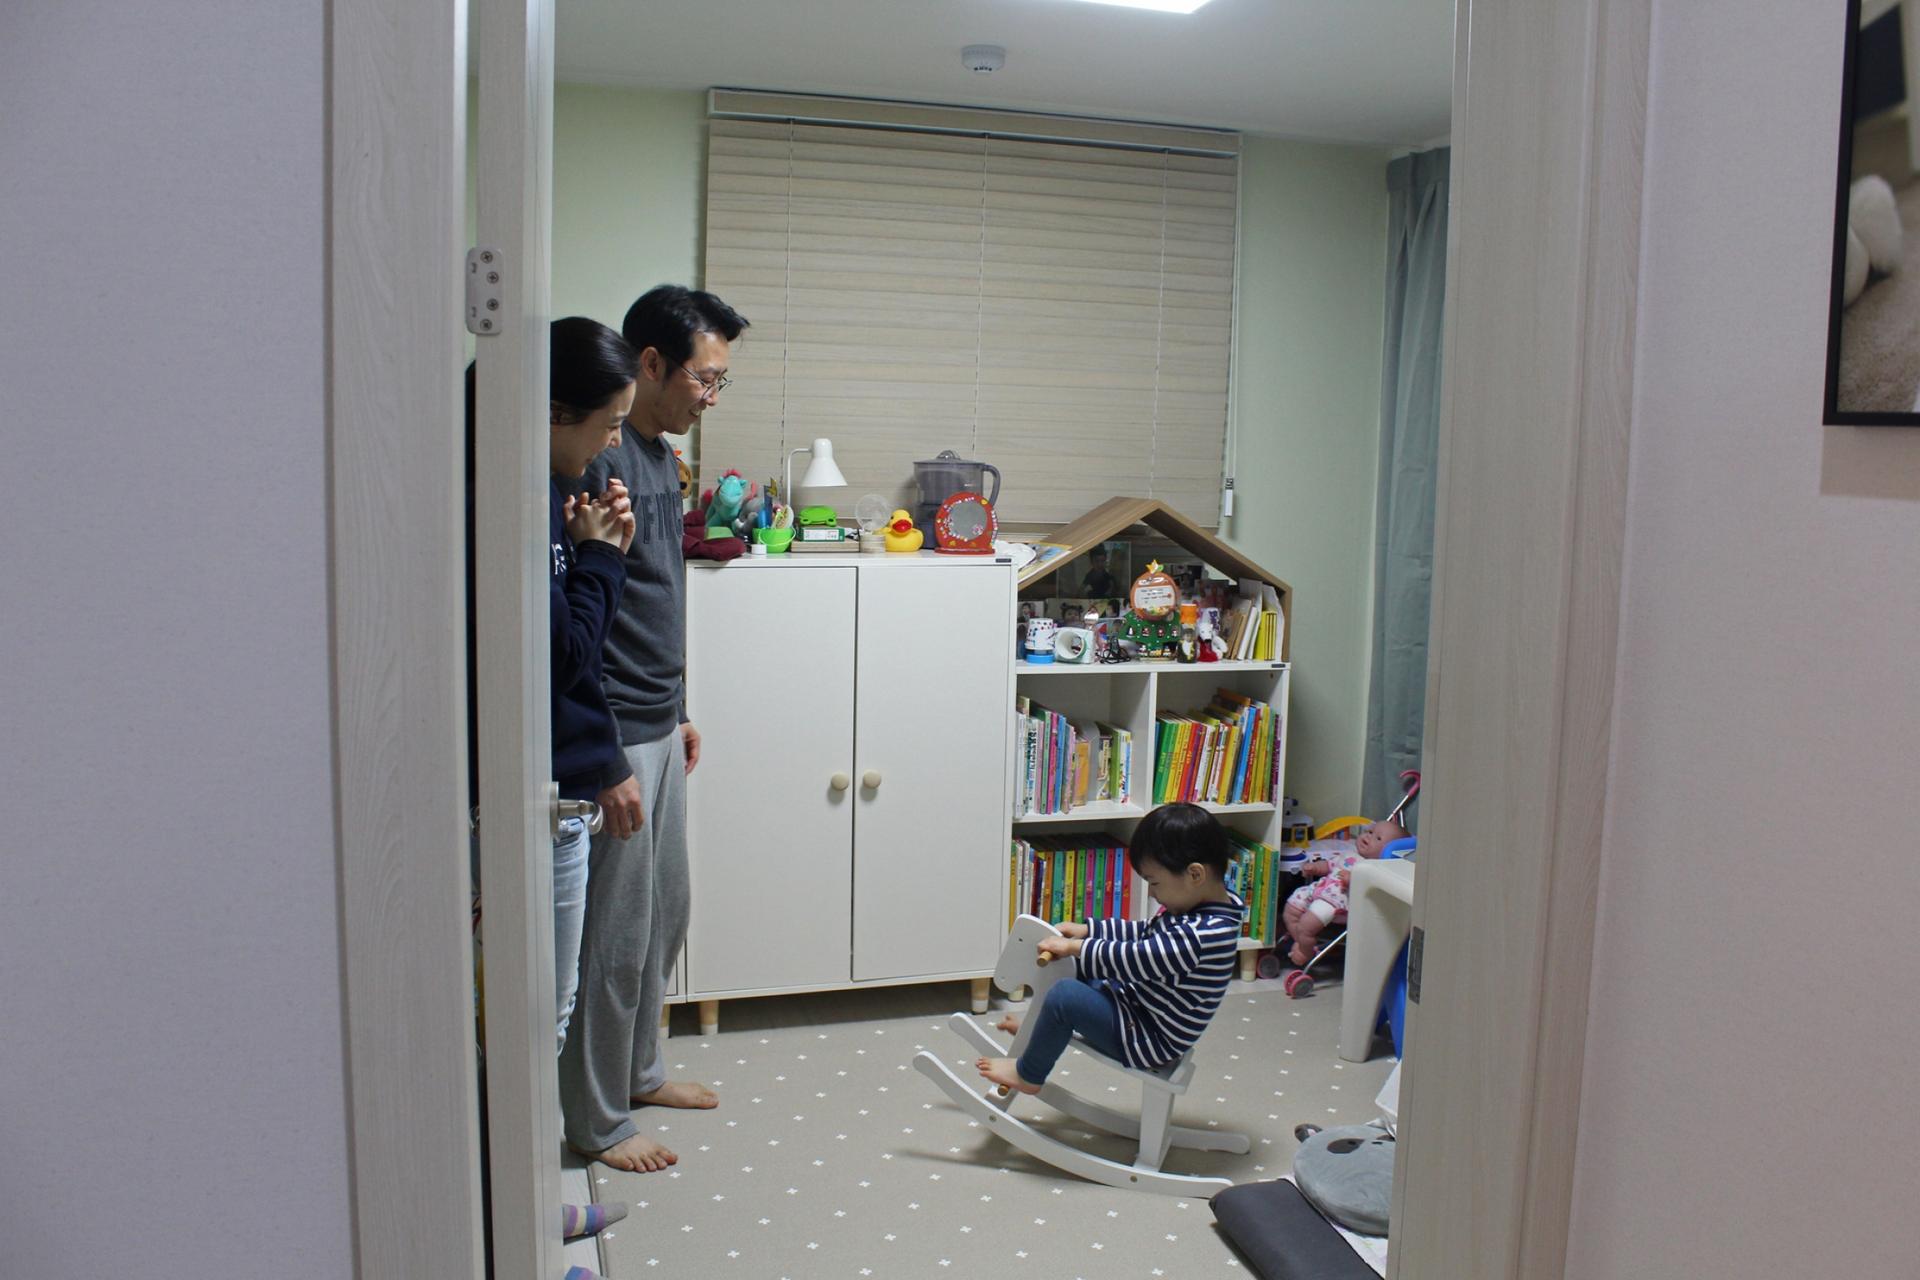 Seo Ji-hye and Cho Sung-won watch as their two-year-old son, Han-sol, rides a rocking horse in his bedroom in Seoul.